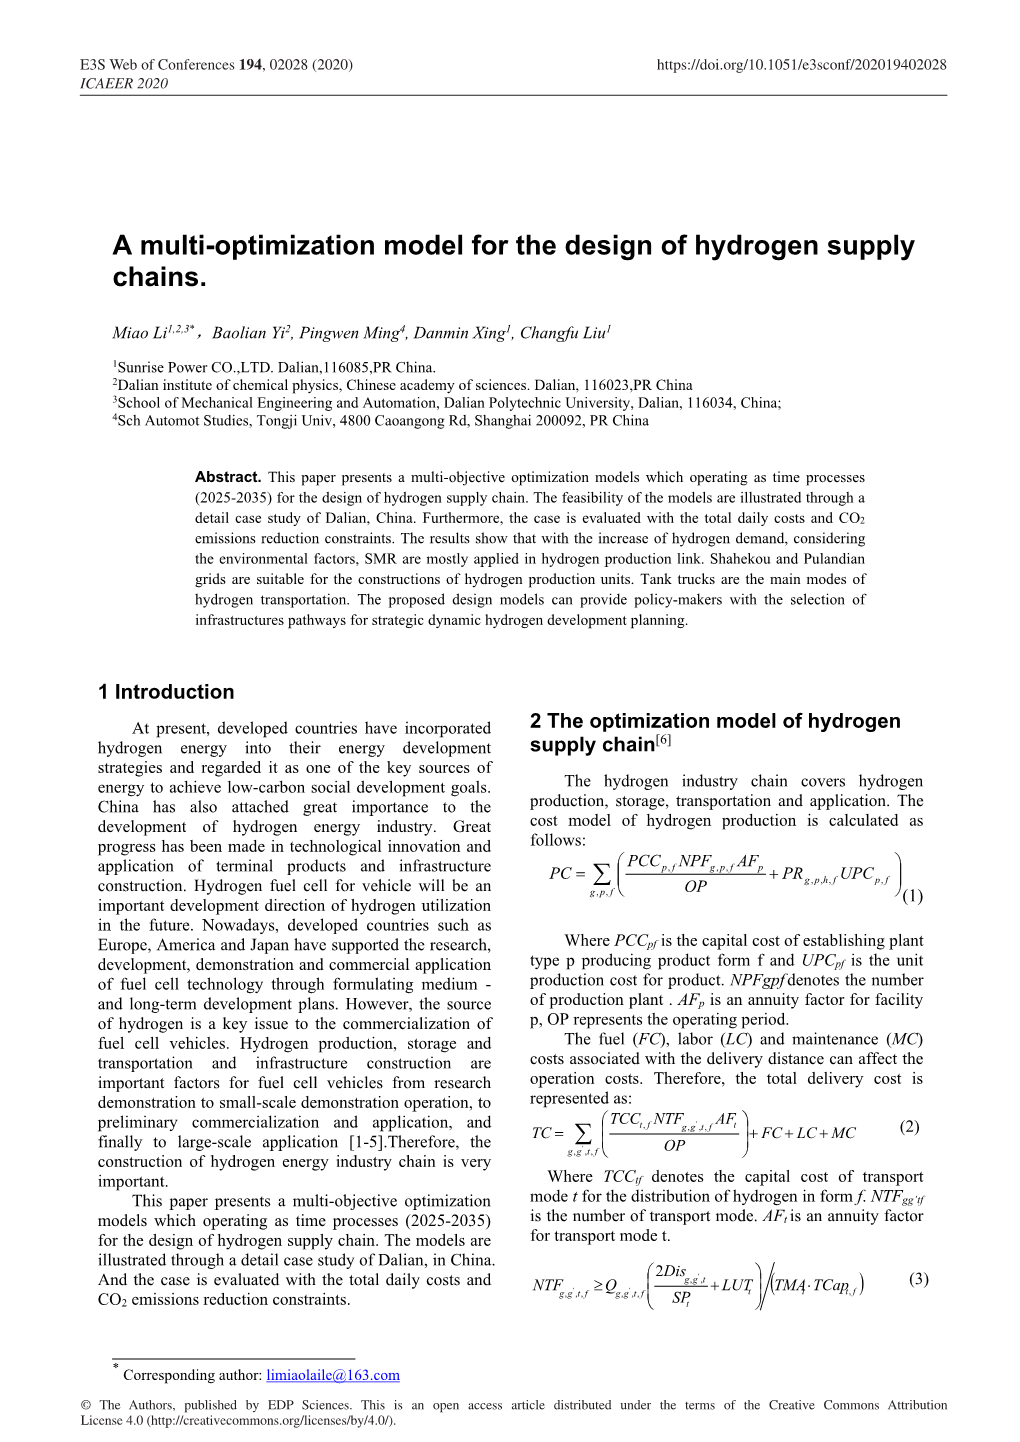 A Multi-Optimization Model for the Design of Hydrogen Supply Chains